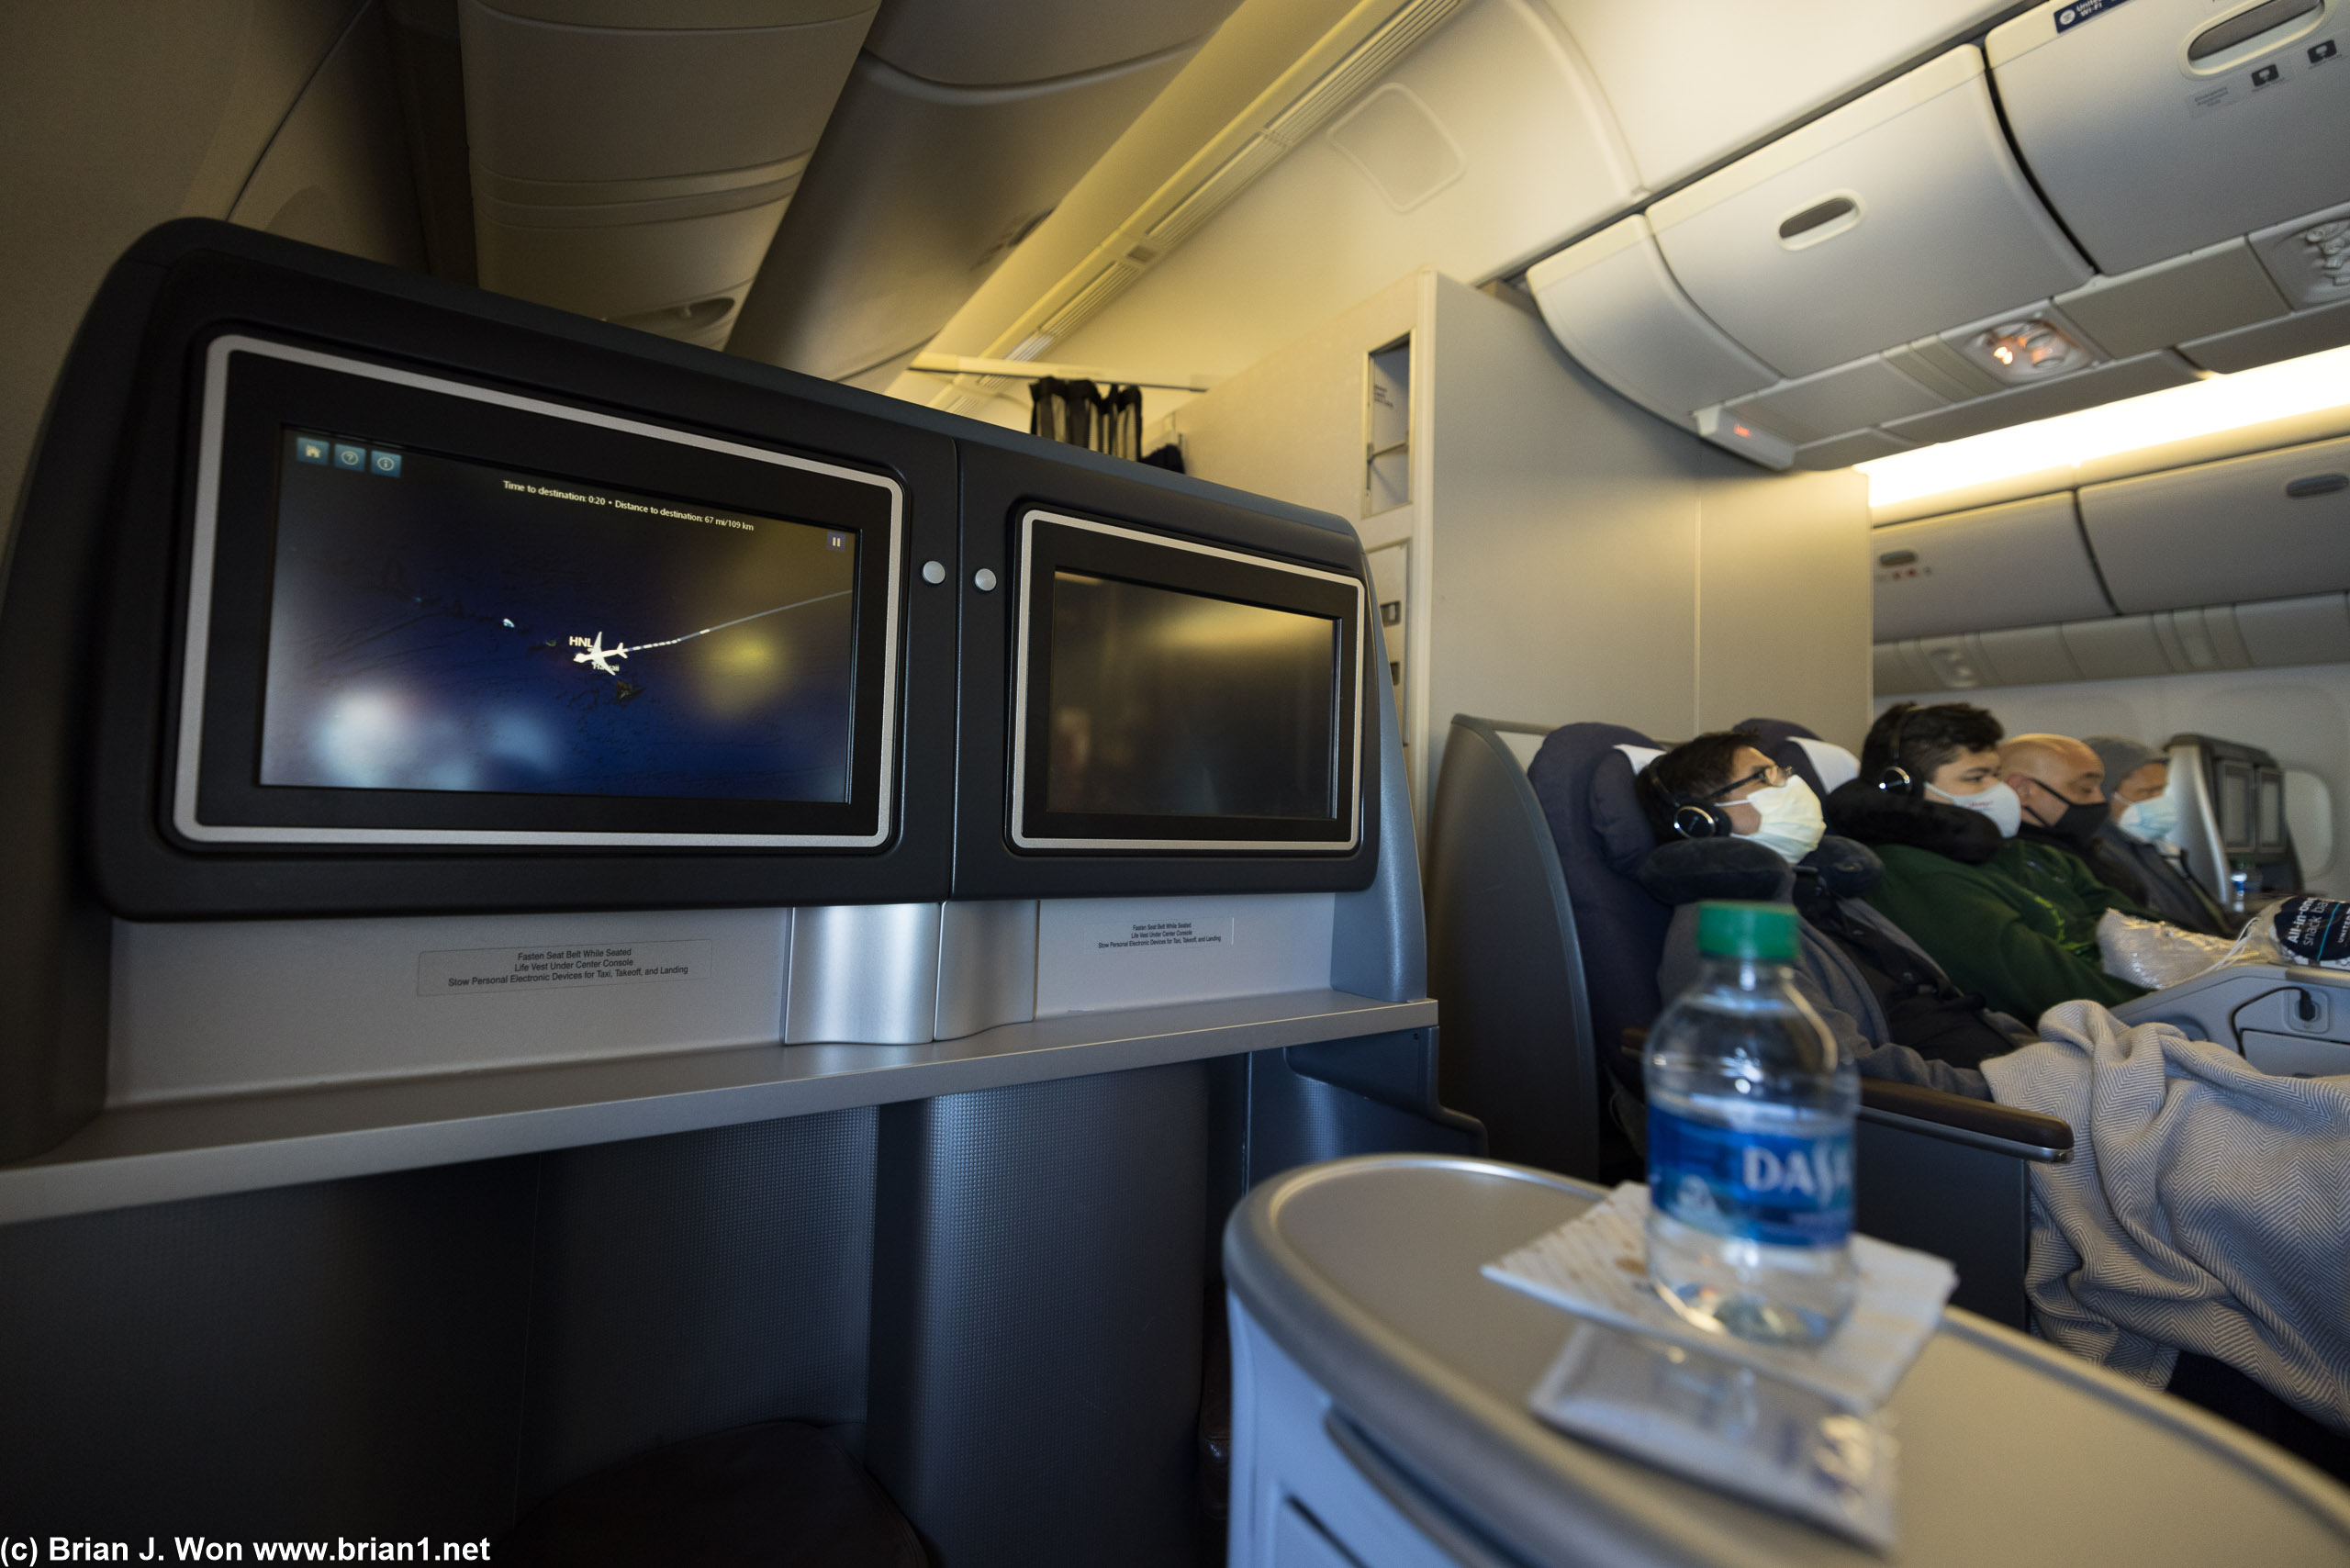 United domestic business class on their old Boeing 777-200.